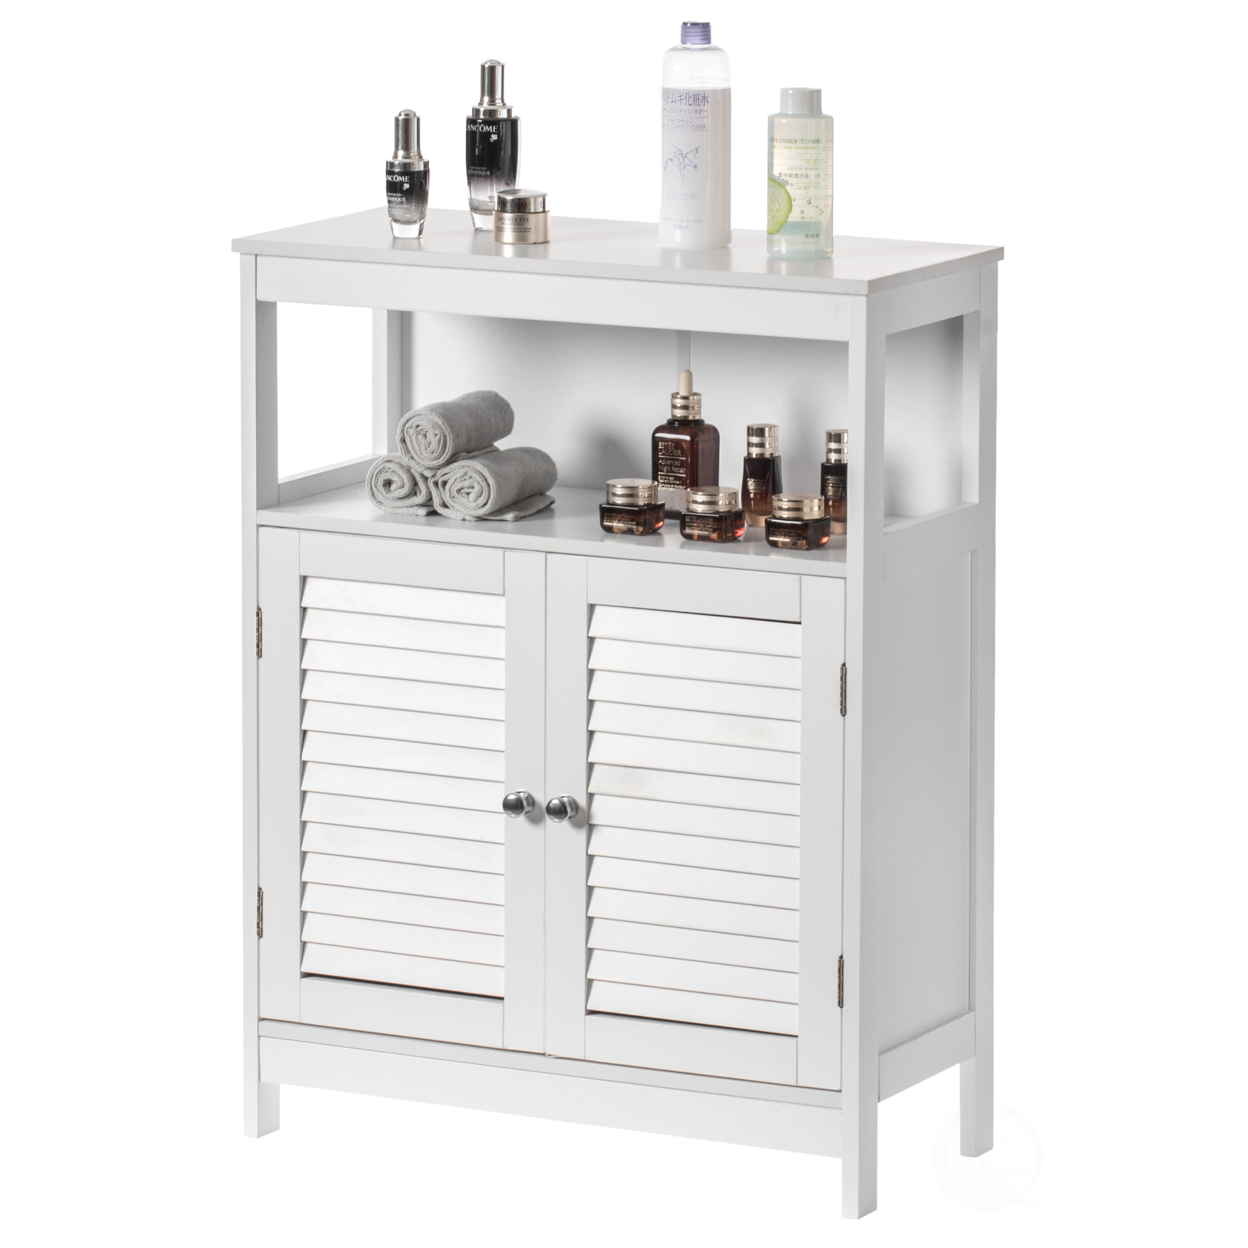 Wooden White Modern Storage Bathroom Vanity Cabinet With Adjustable Shelves And Two Horizontal Planks Design Doors